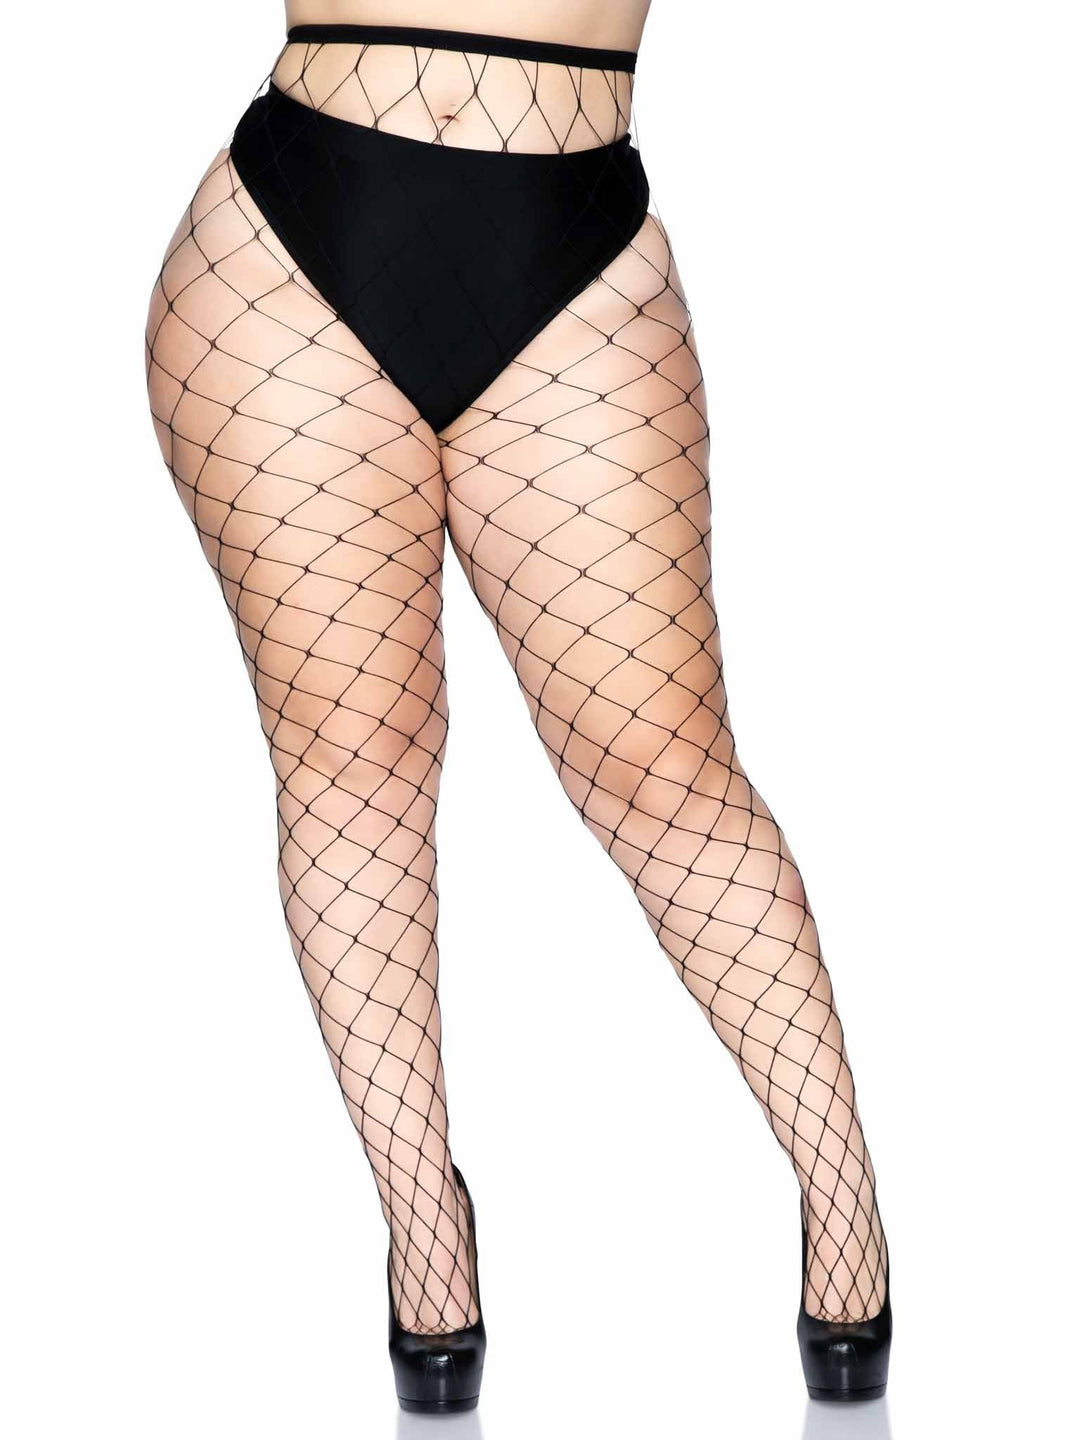 Image of a person wearing the Fence Net Pantyhose in Queen size.